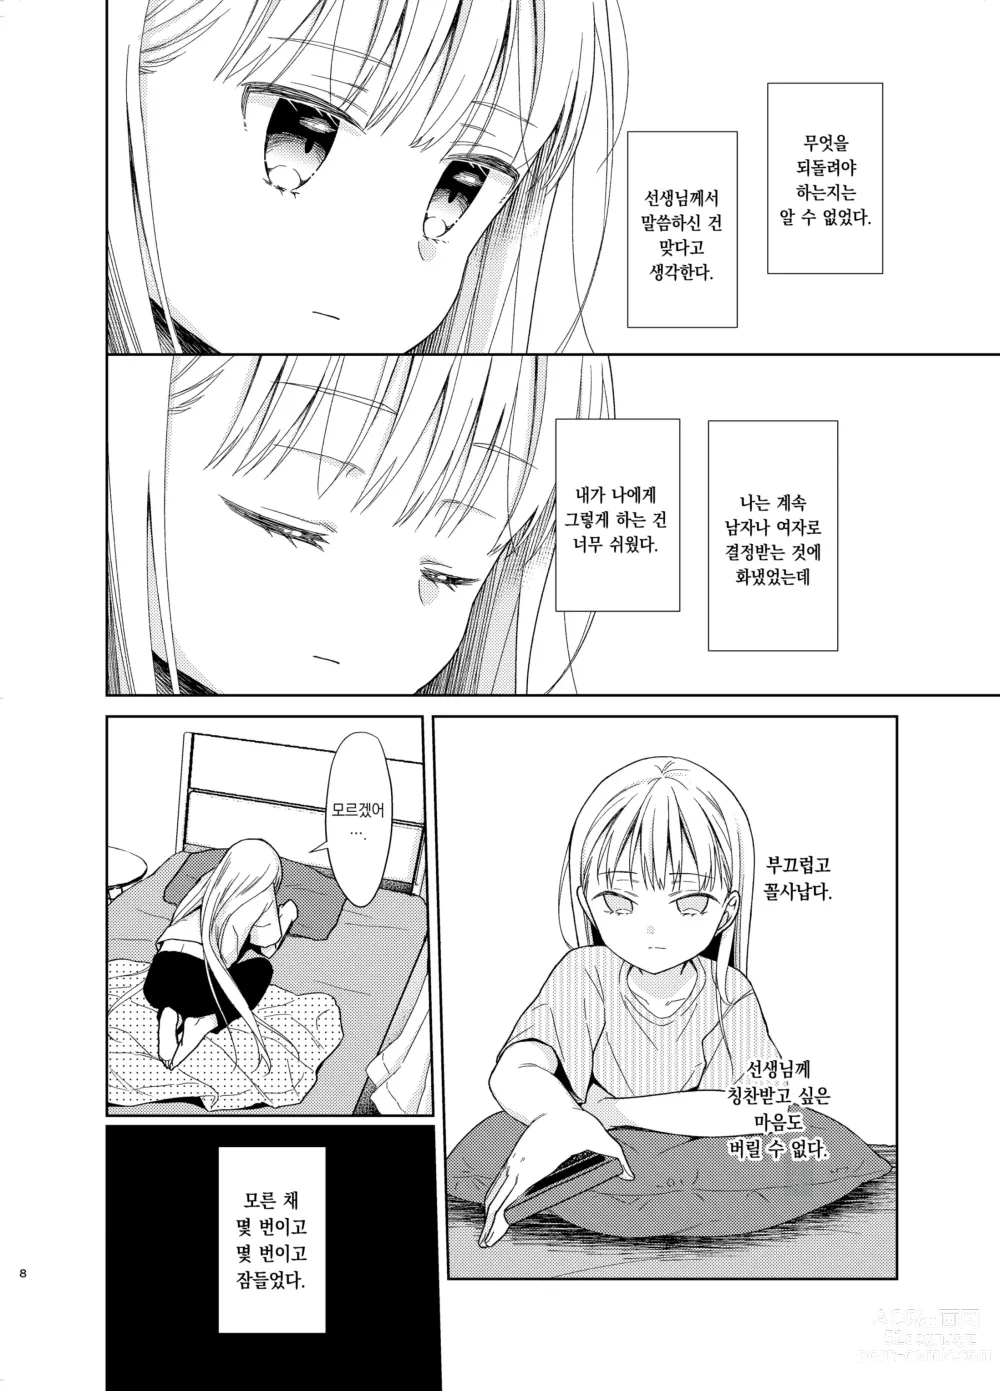 Page 7 of doujinshi TS소녀 하루키 군 5